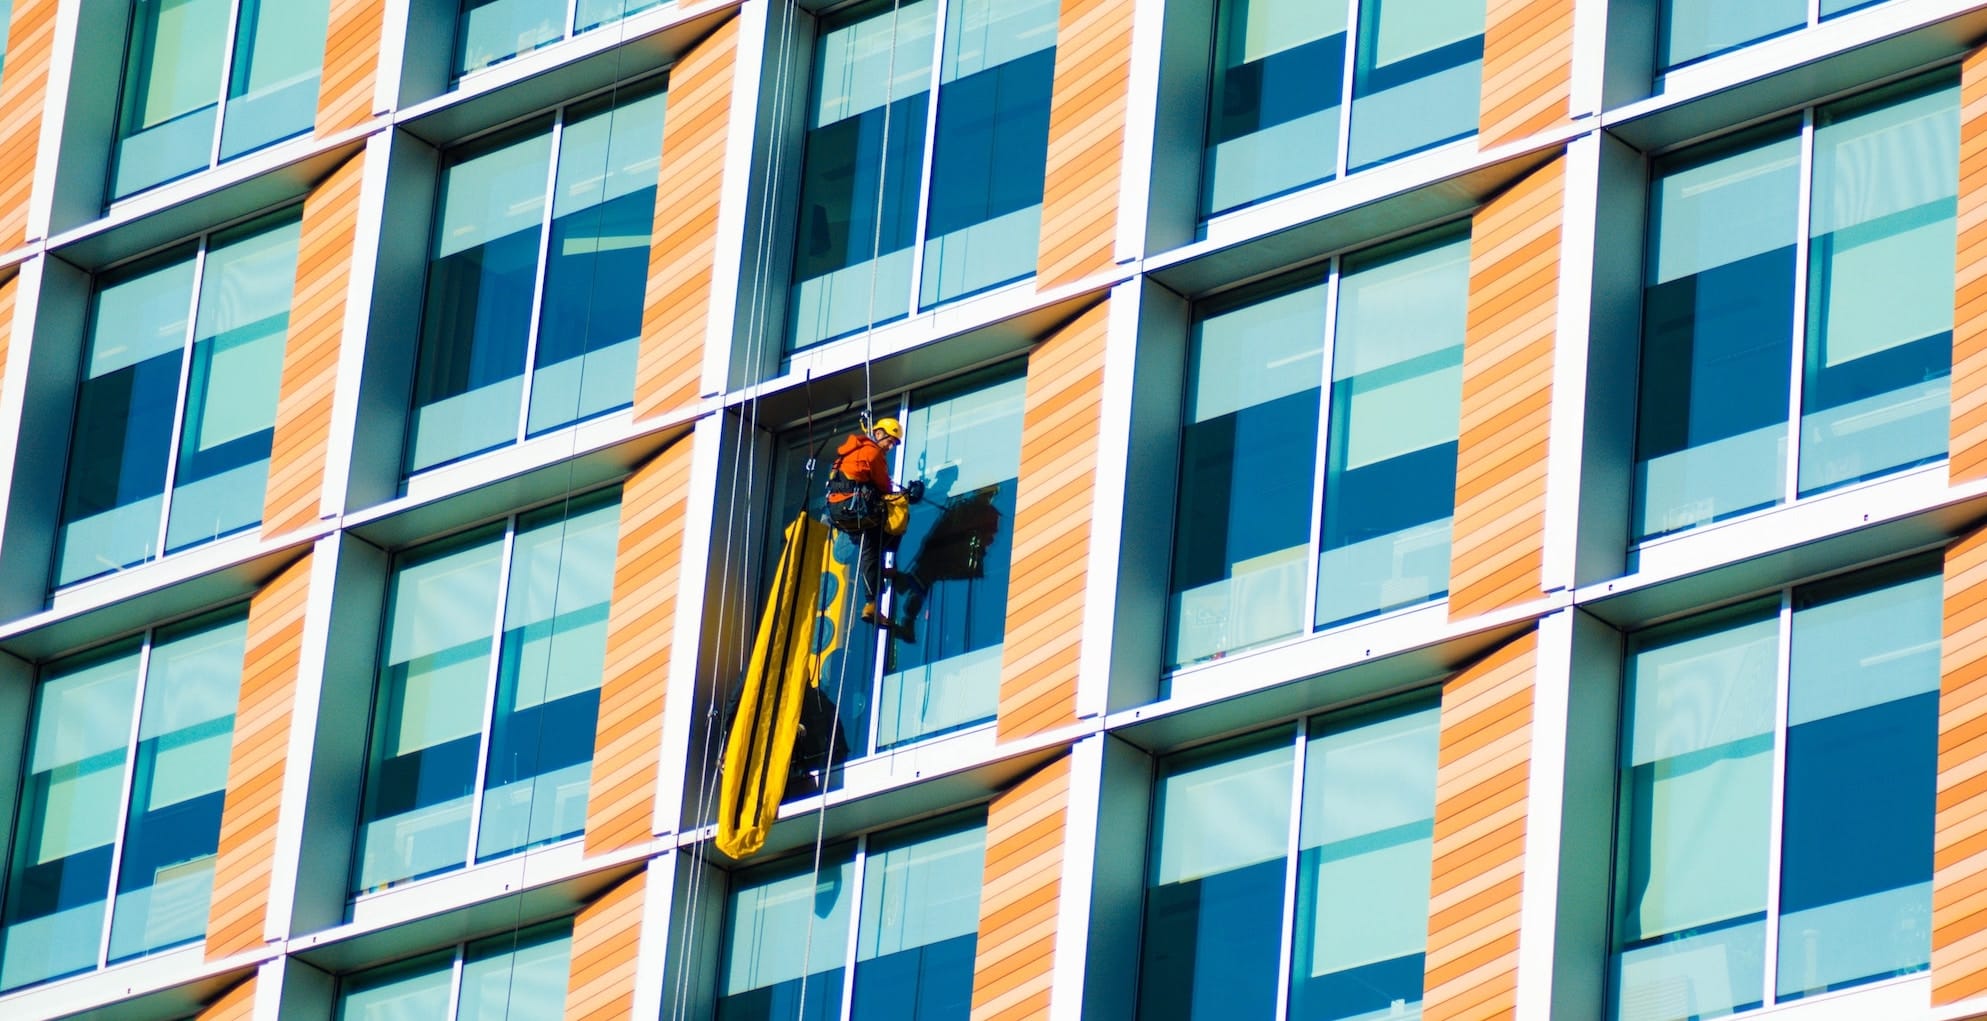 A window cleaner in safety gear is suspended on a platform cleaning a multicolored, geometric-patterned high-rise building under a clear blue sky.